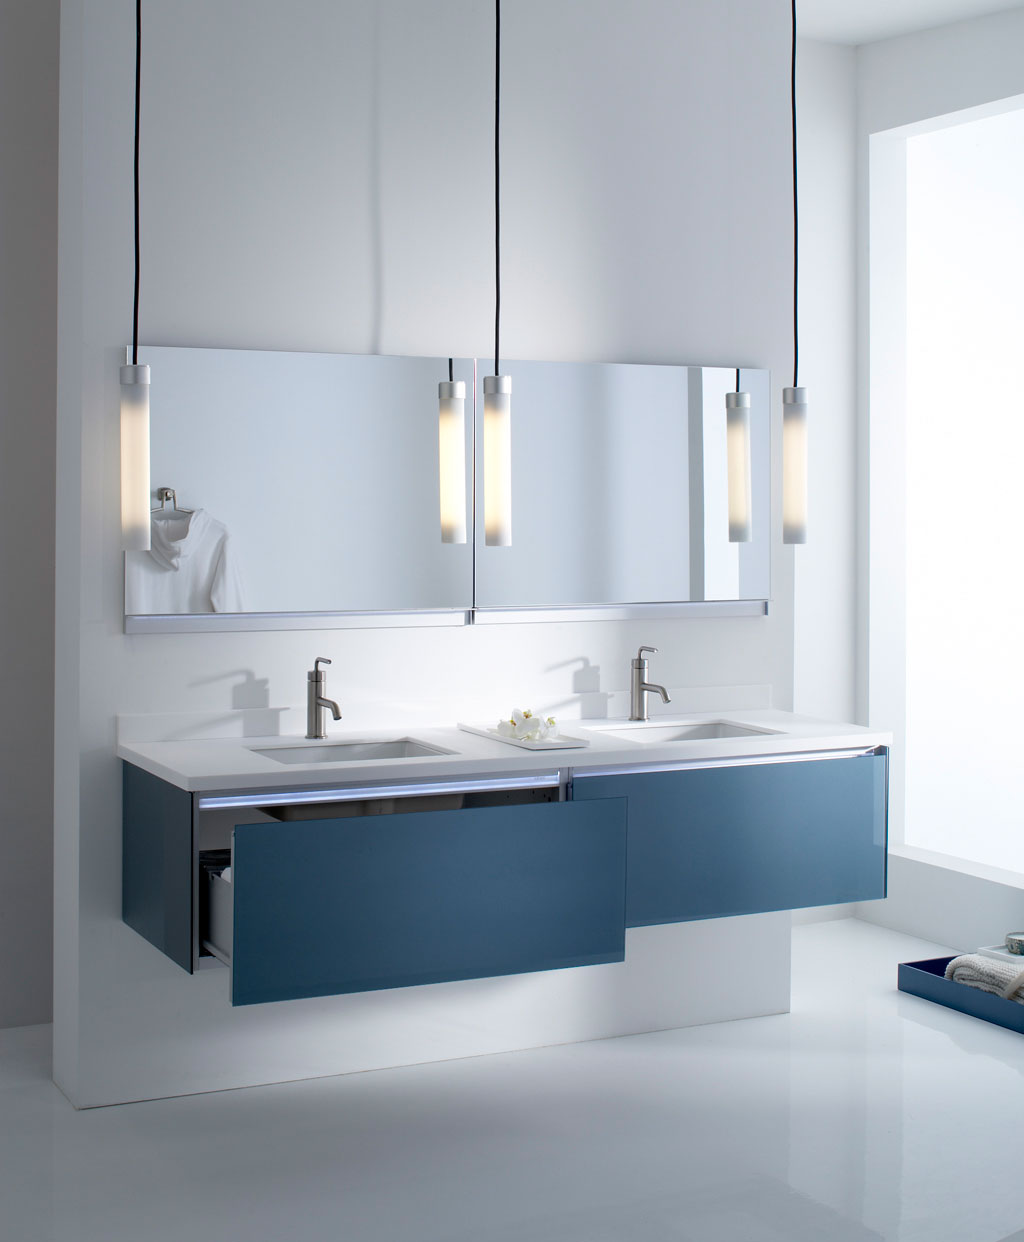 Wall Mounted With Modern Wall Mounted Bathroom Vanity With Double Drawers And Under Mount Sinks Feat Beautiful Light Fixture Bathroom Modern Bathroom Vanity Ideas